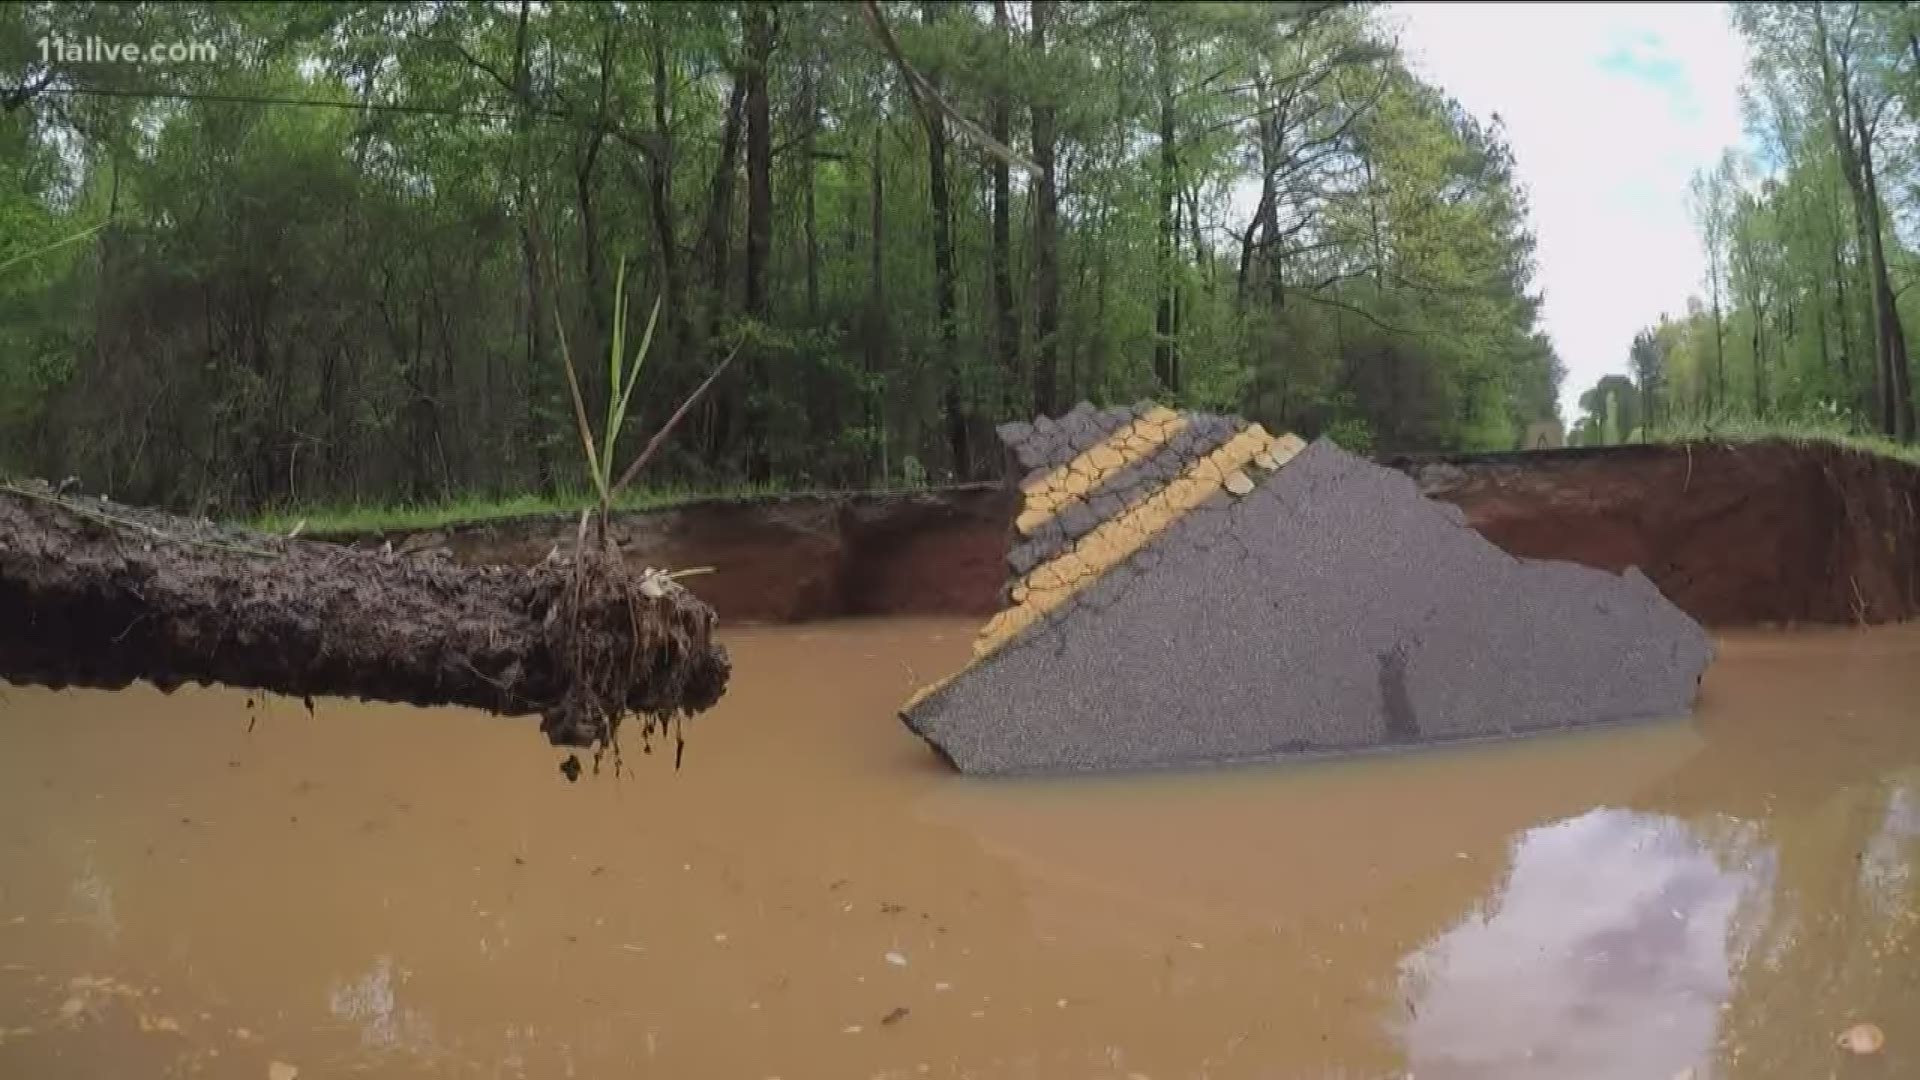 Sinkholes and flooding are still an issue around Georgia.